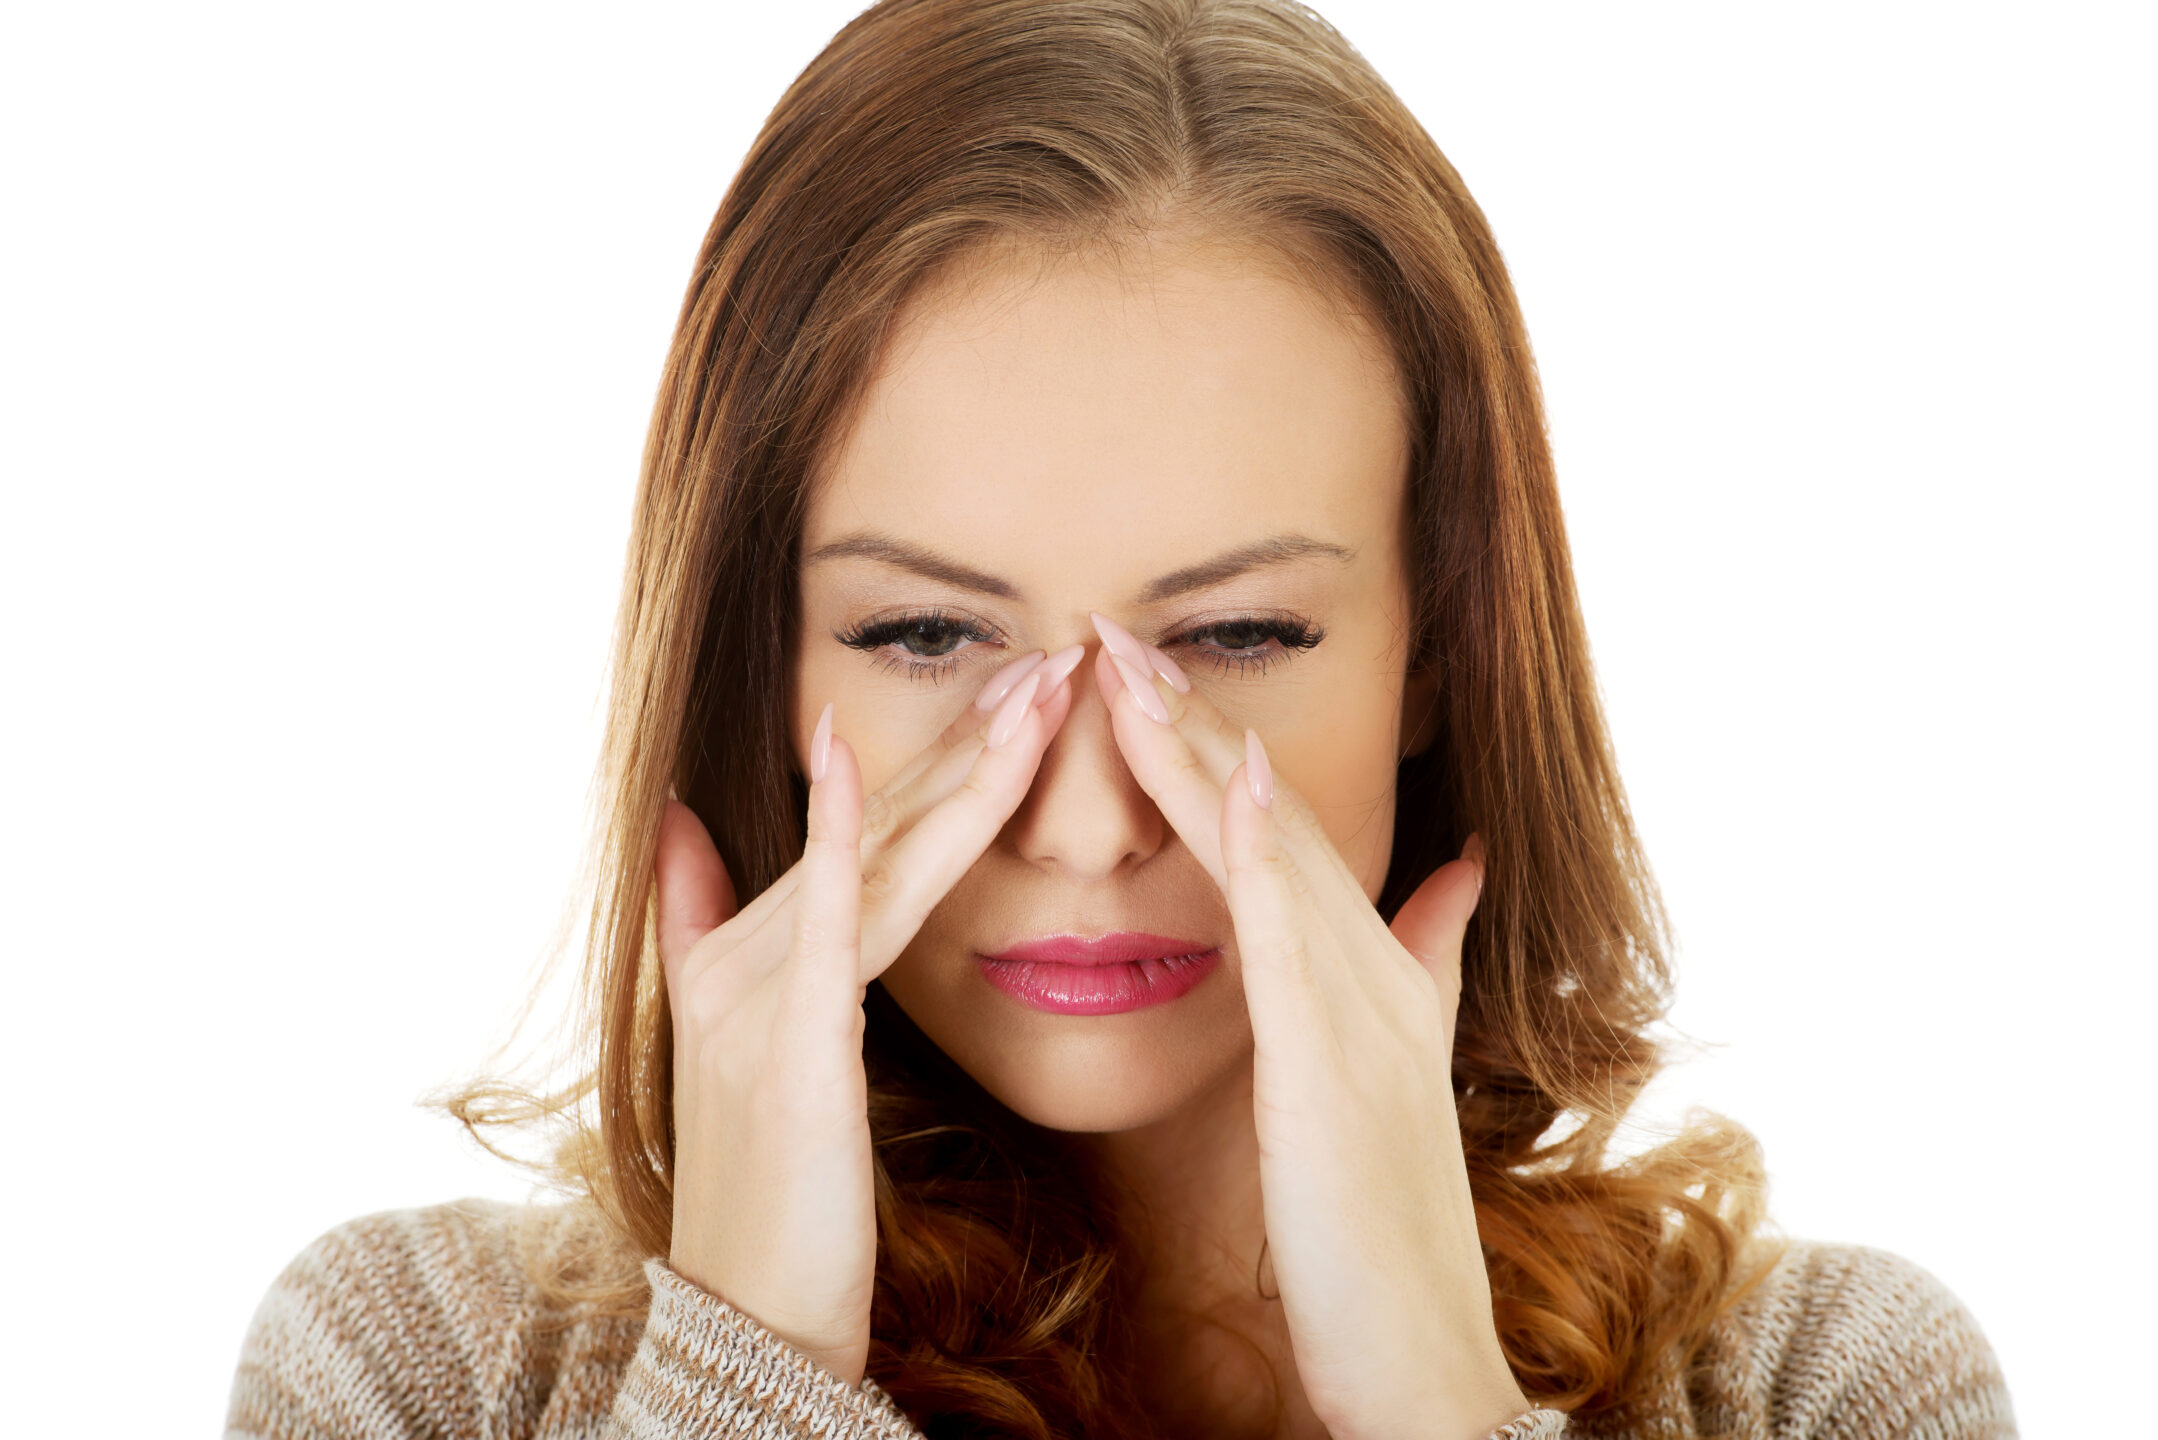 A young woman with sinus pain holds her fingers to her nose and wonders about septoplasty recovery day by day.